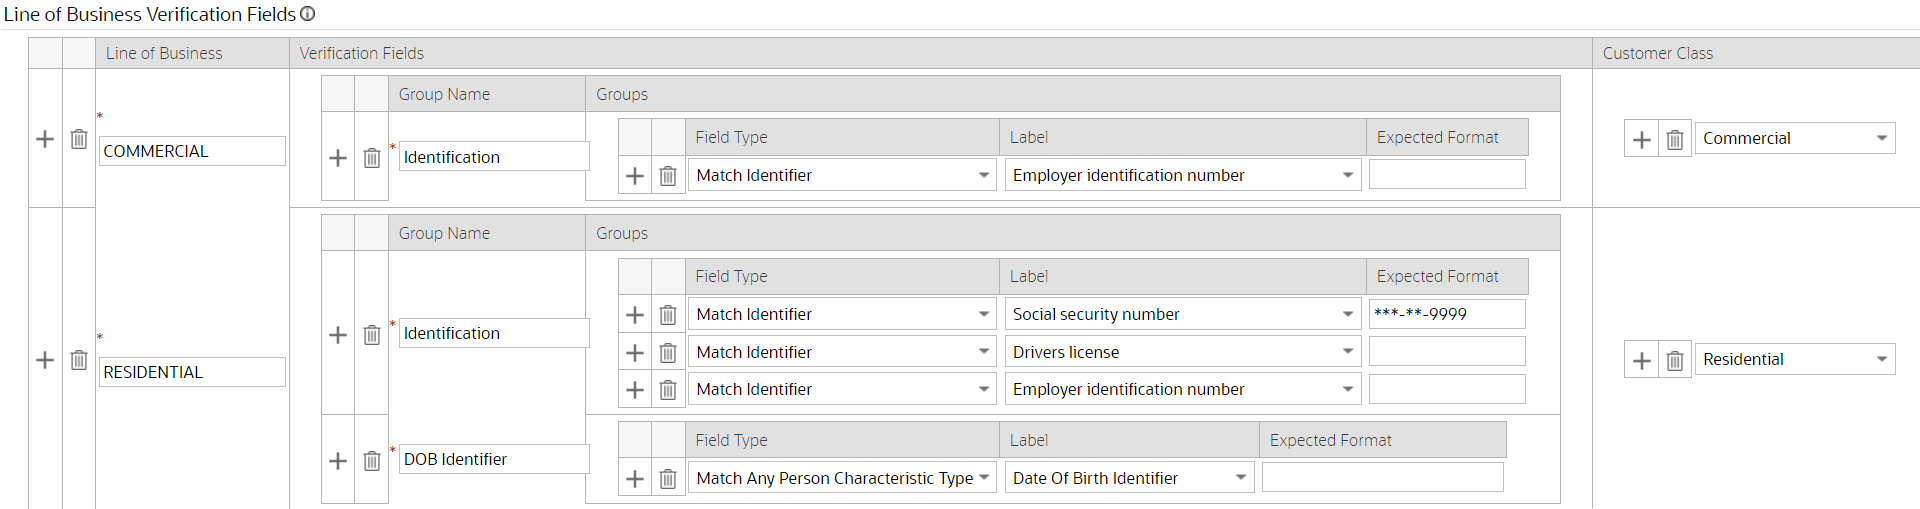 Line of business configurations in the master configuration including one residential and one commerical line of business along with the required account identifiers